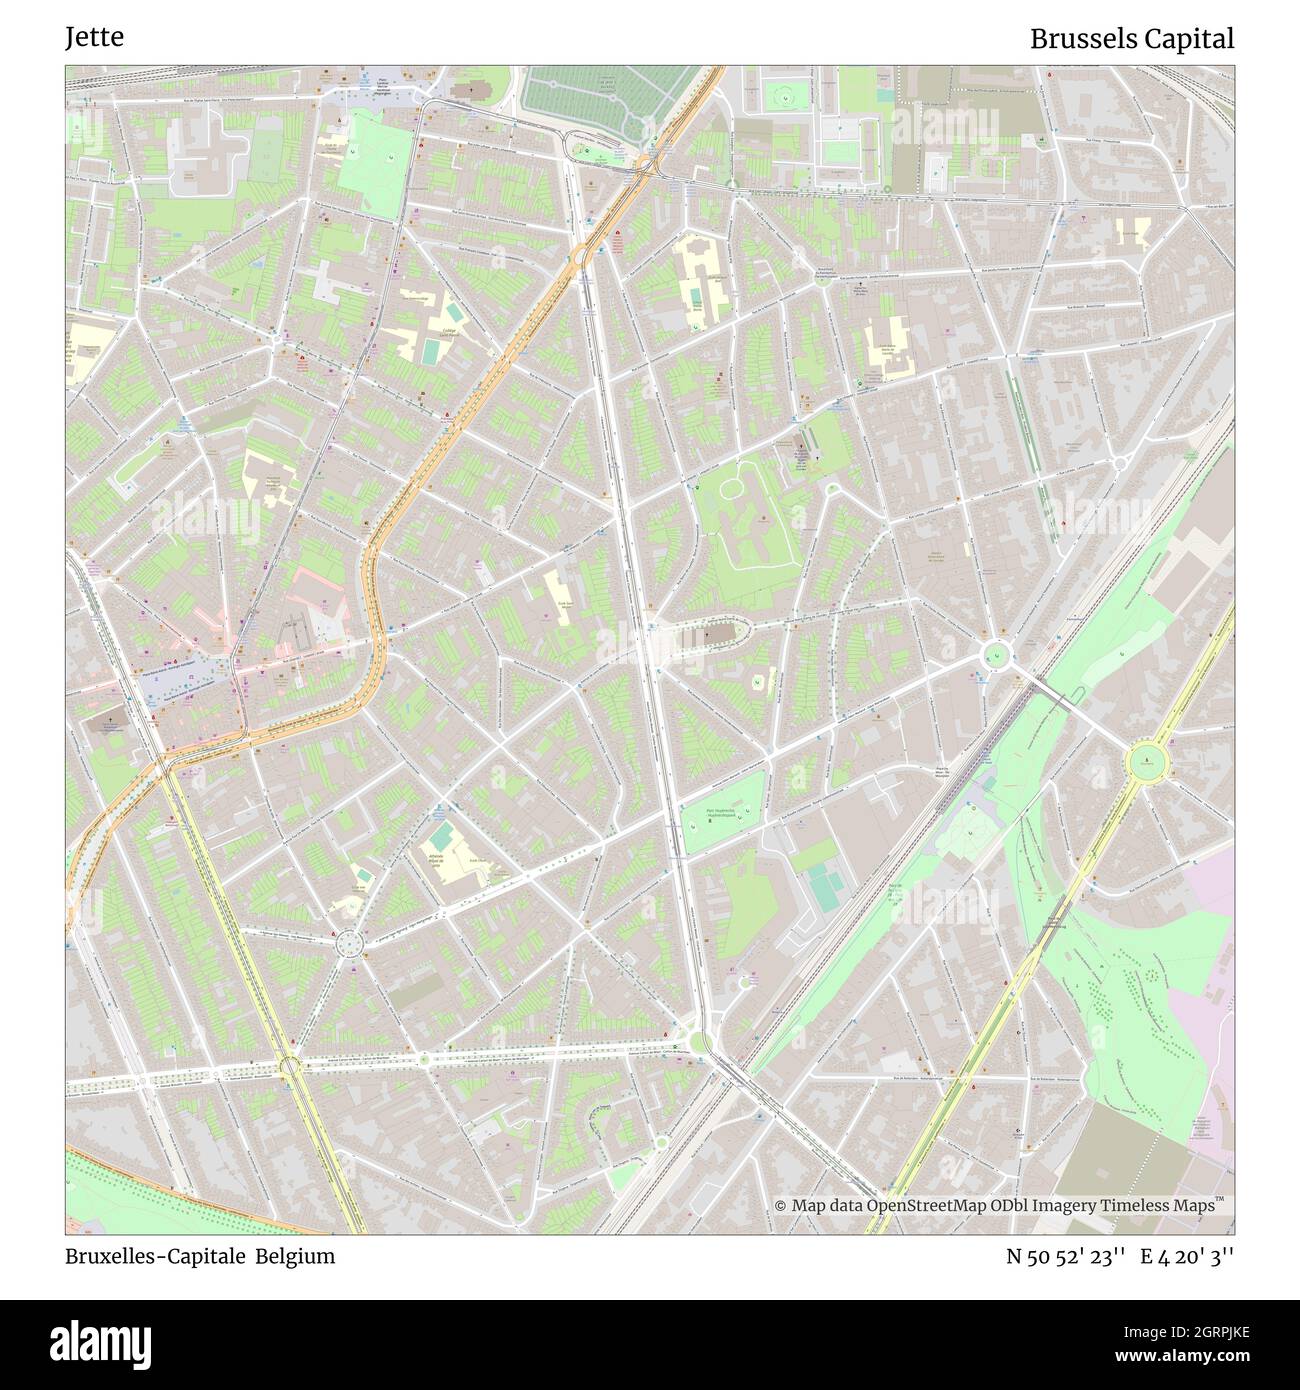 Jette, Bruxelles-Capitale, Belgium, Brussels Capital, N 50 52' 23'', E 4  20' 3'', map, Timeless Map published in 2021. Travelers, explorers and  adventurers like Florence Nightingale, David Livingstone, Ernest  Shackleton, Lewis and